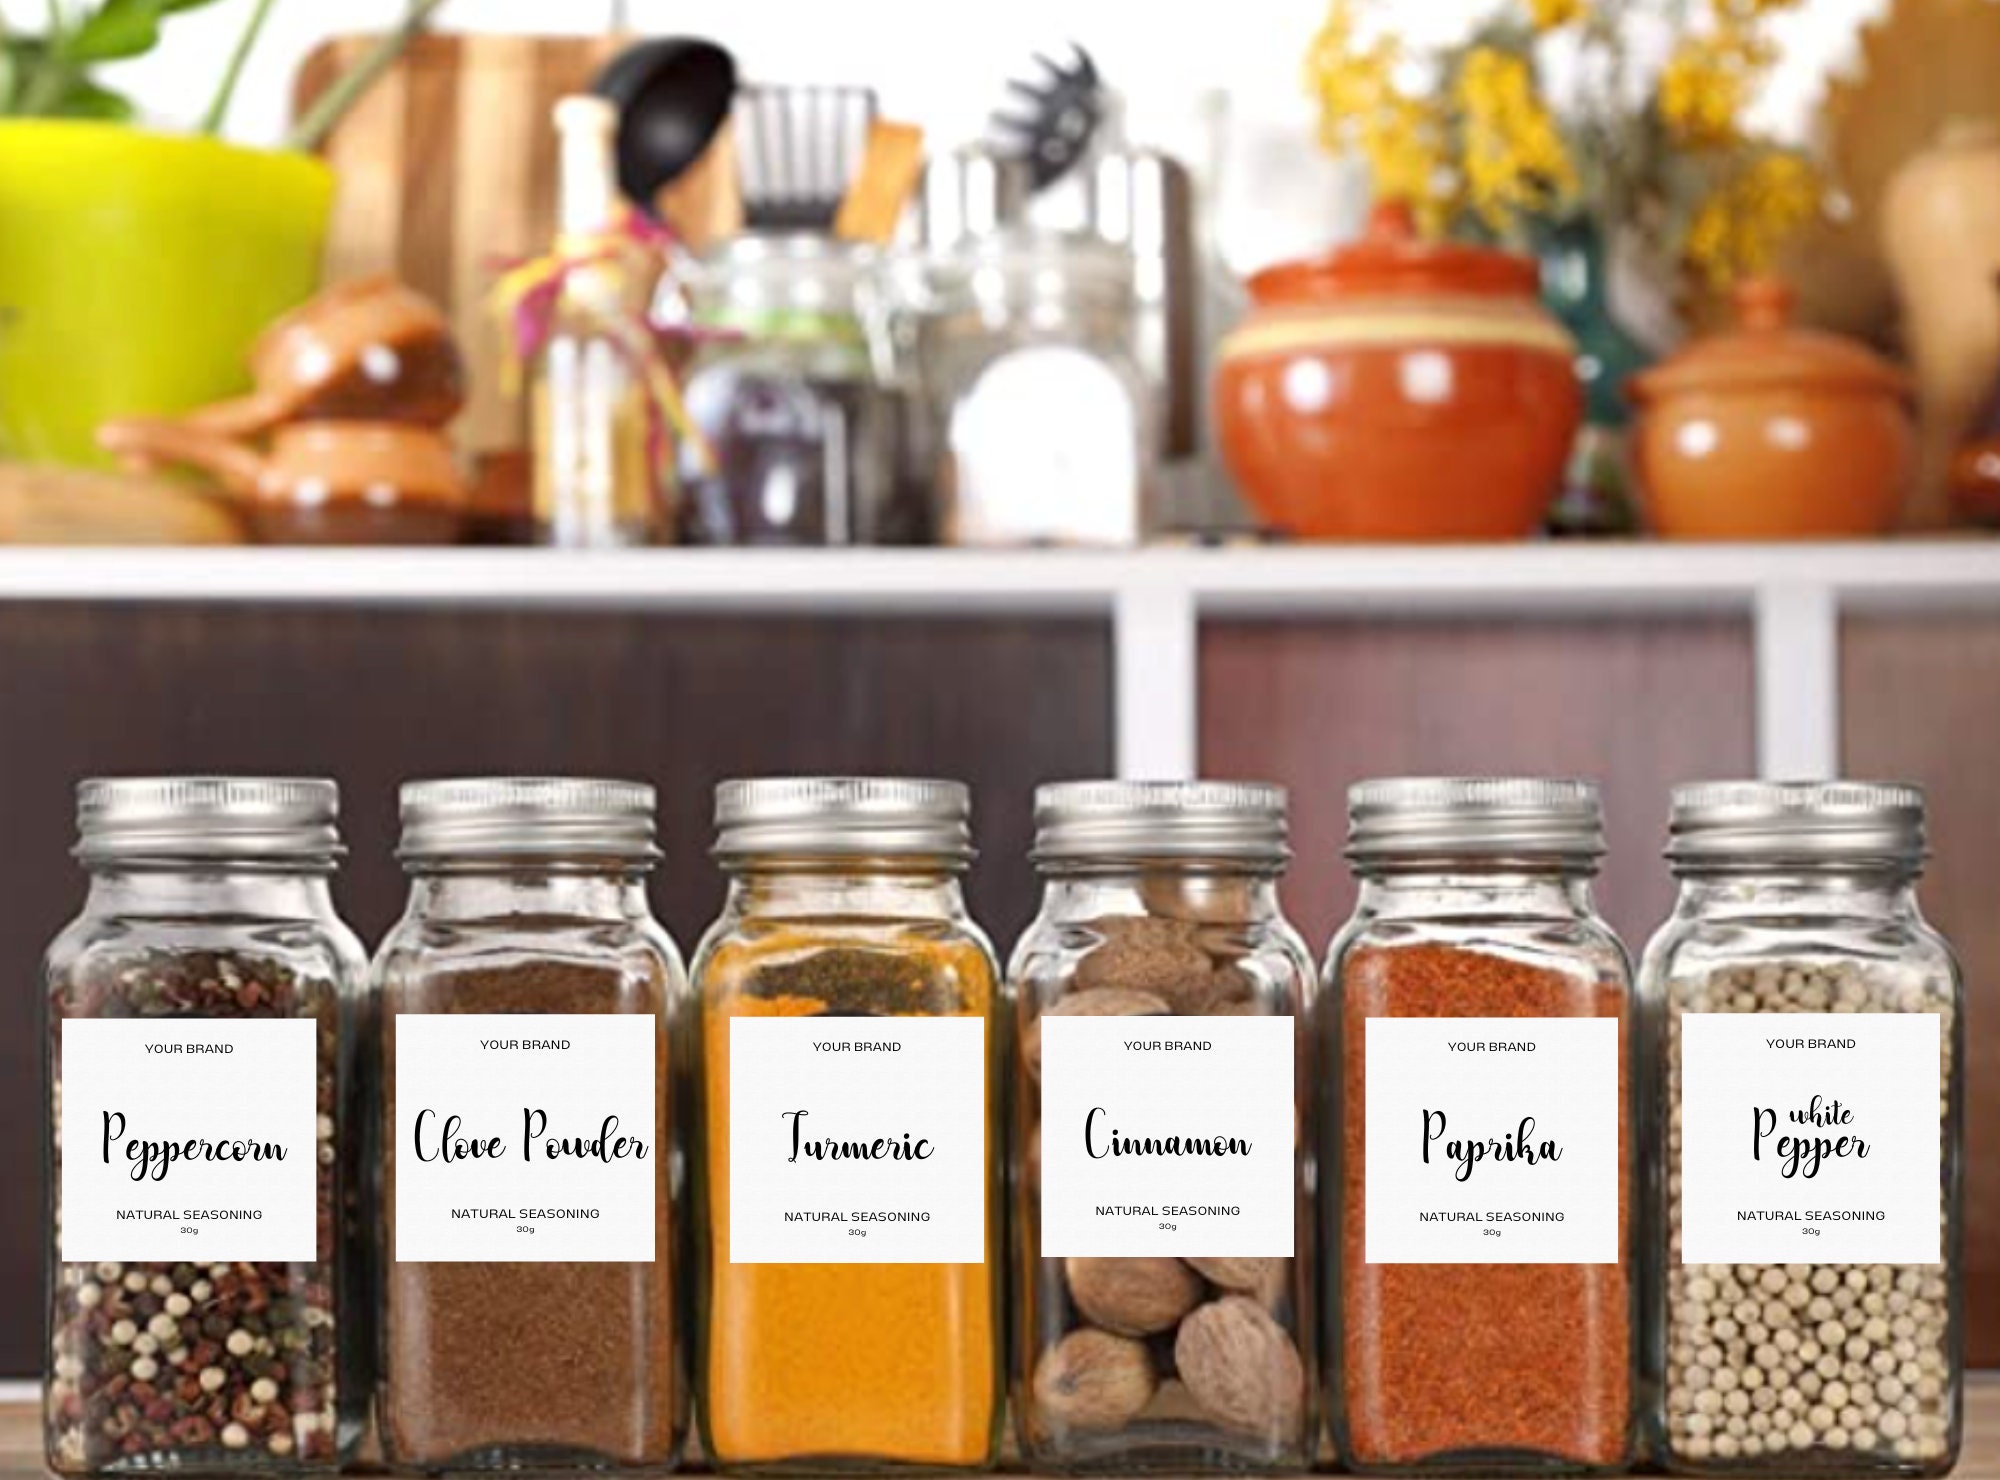 50+ Customizable Food Label Templates to Make Your Pantry Dreams Come True